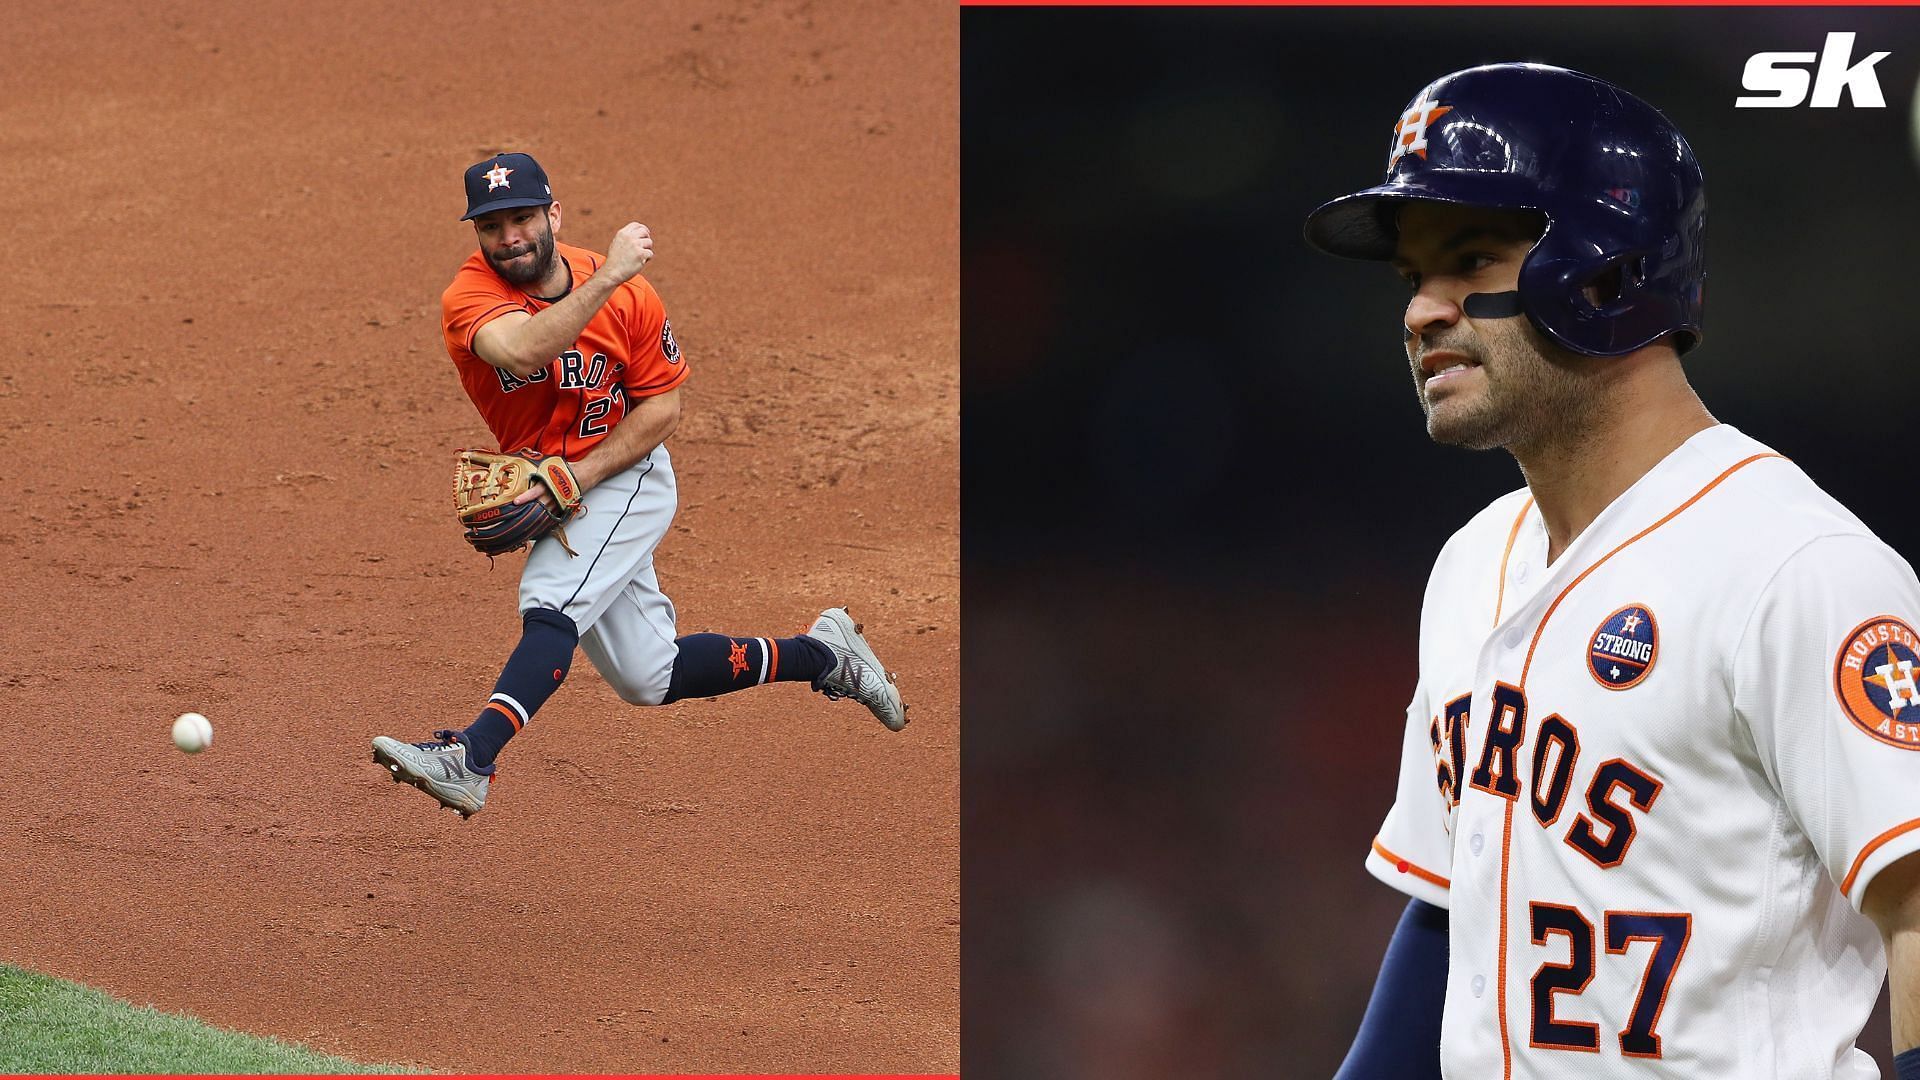 Jose Altuve took responsibility for his team in their sign-stealing scandal despite not being directly implicated